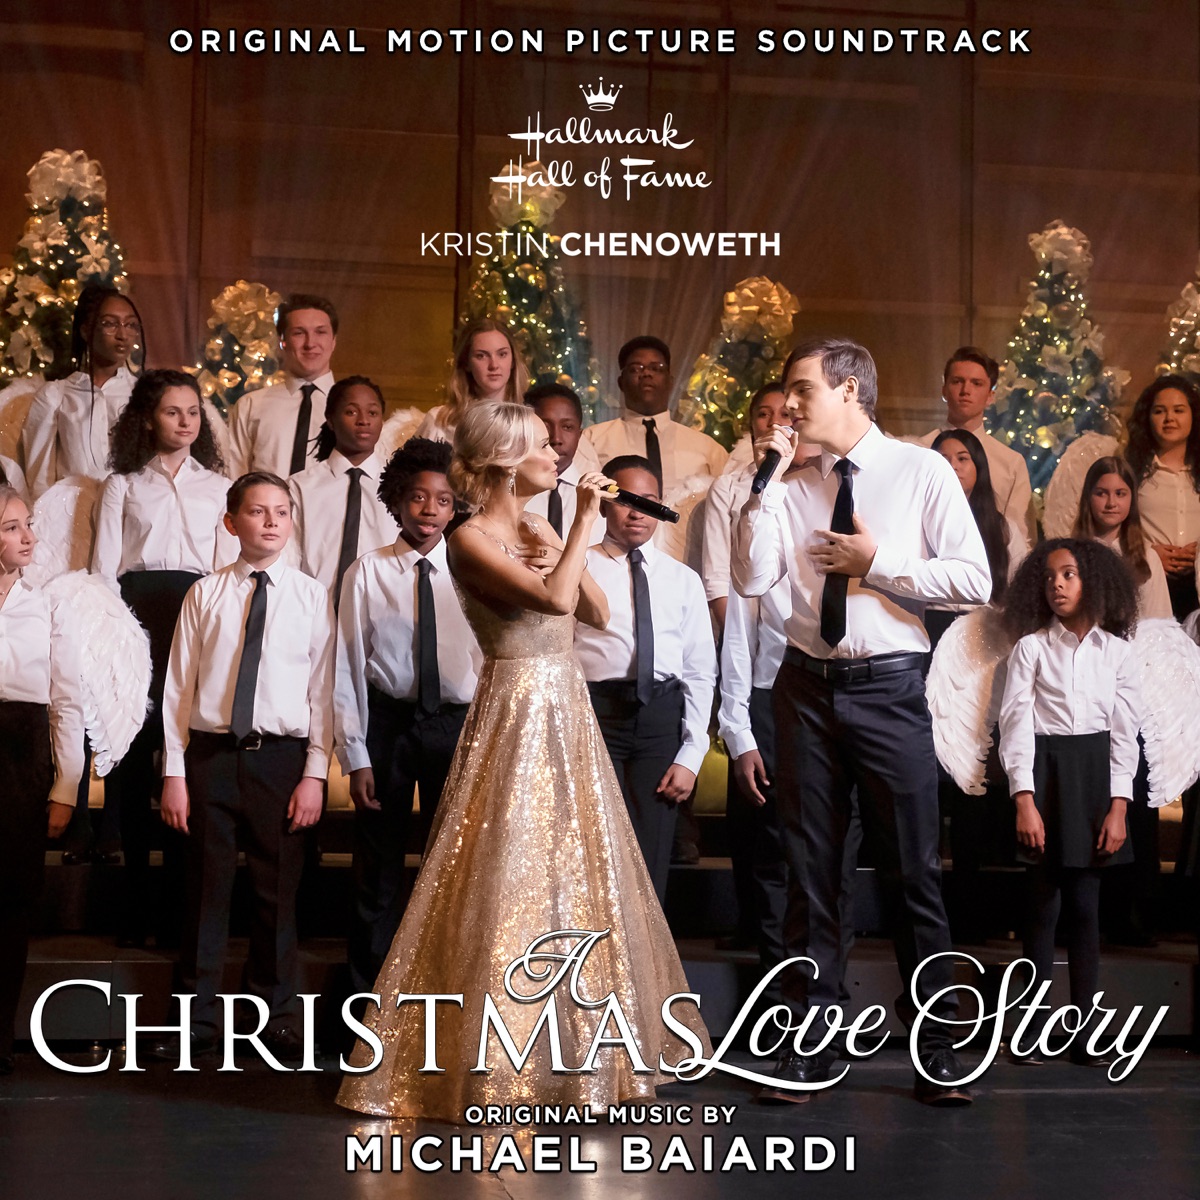 A Christmas Love Story (Original Motion Picture Soundtrack) by Michael  Baiardi on Apple Music